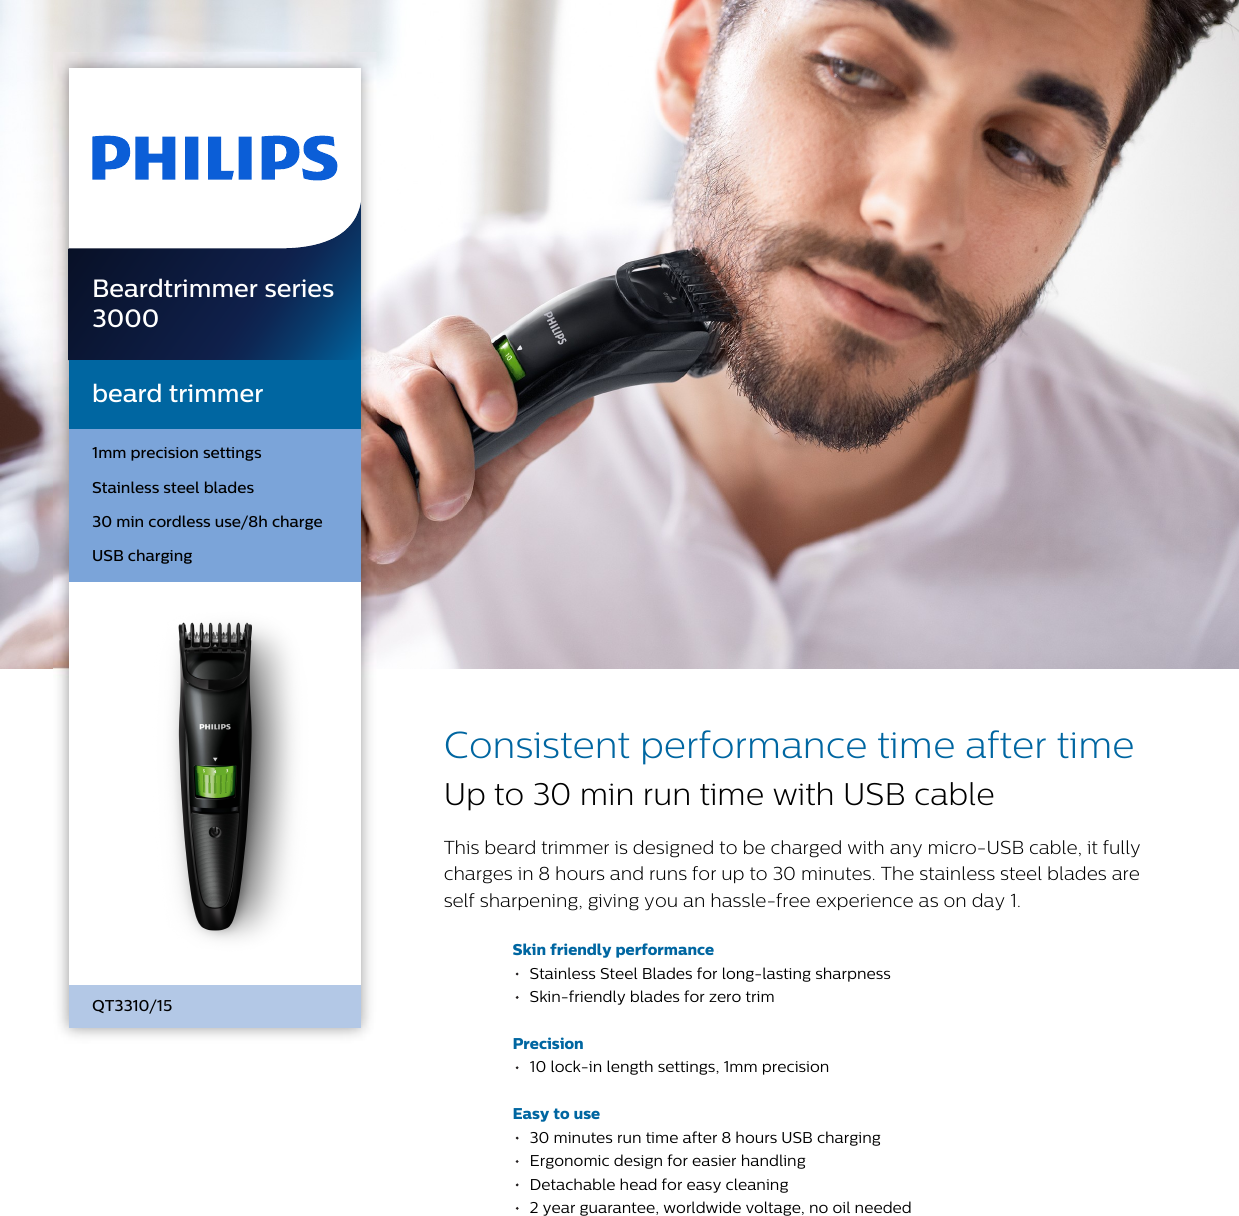 Page 1 of 3 - Philips QT3310/15 Beard Trimmer User Manual Leaflet Qt3310 15 Pss Aenin